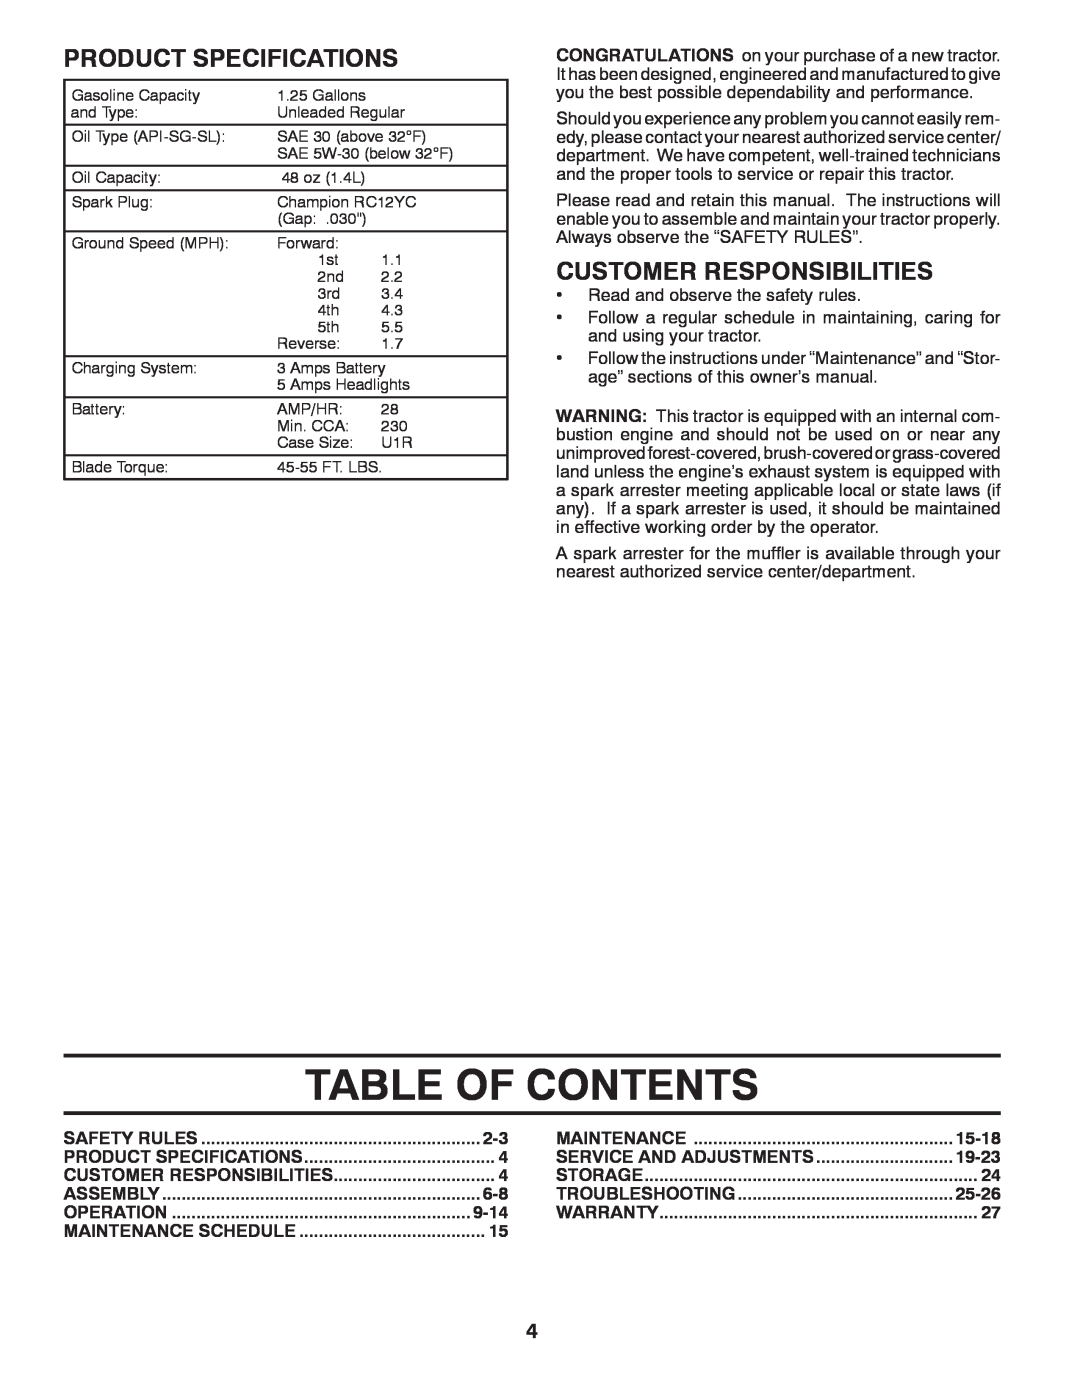 Poulan 425001 manual Table Of Contents, Product Specifications, Customer Responsibilities 